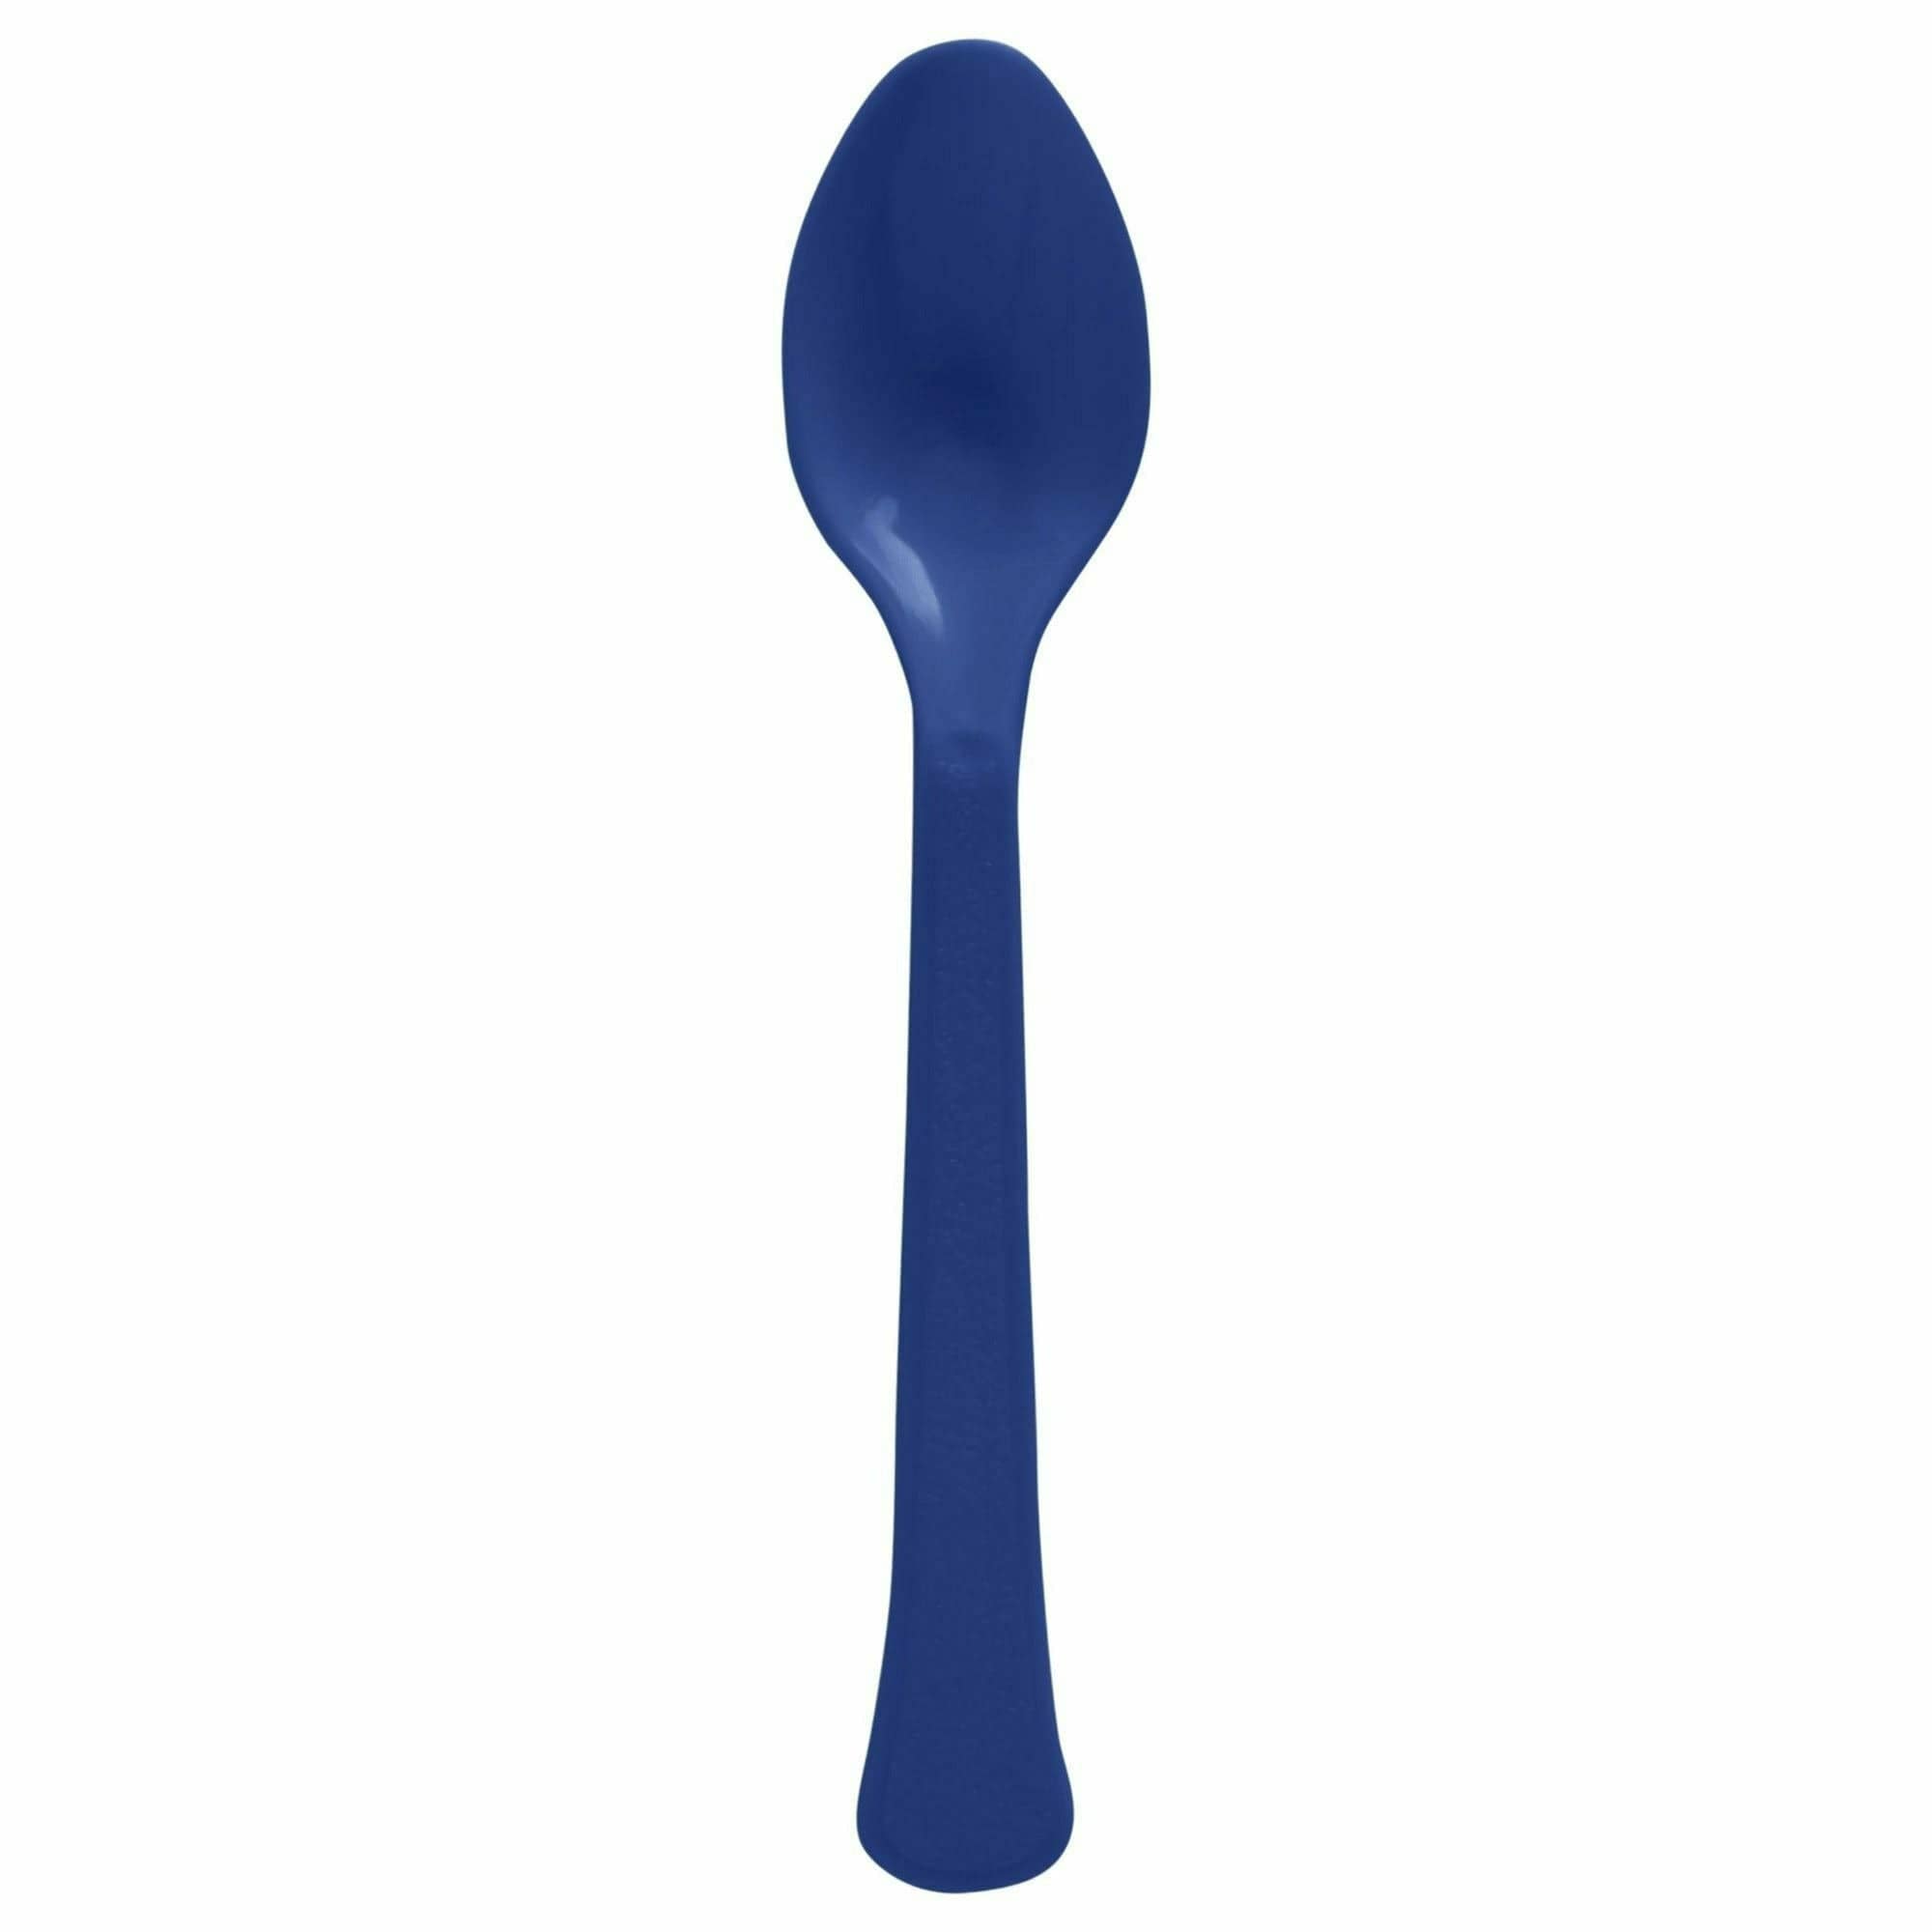 Amscan BASIC True Navy - Boxed, Heavy Weight Spoons, 20 Ct.